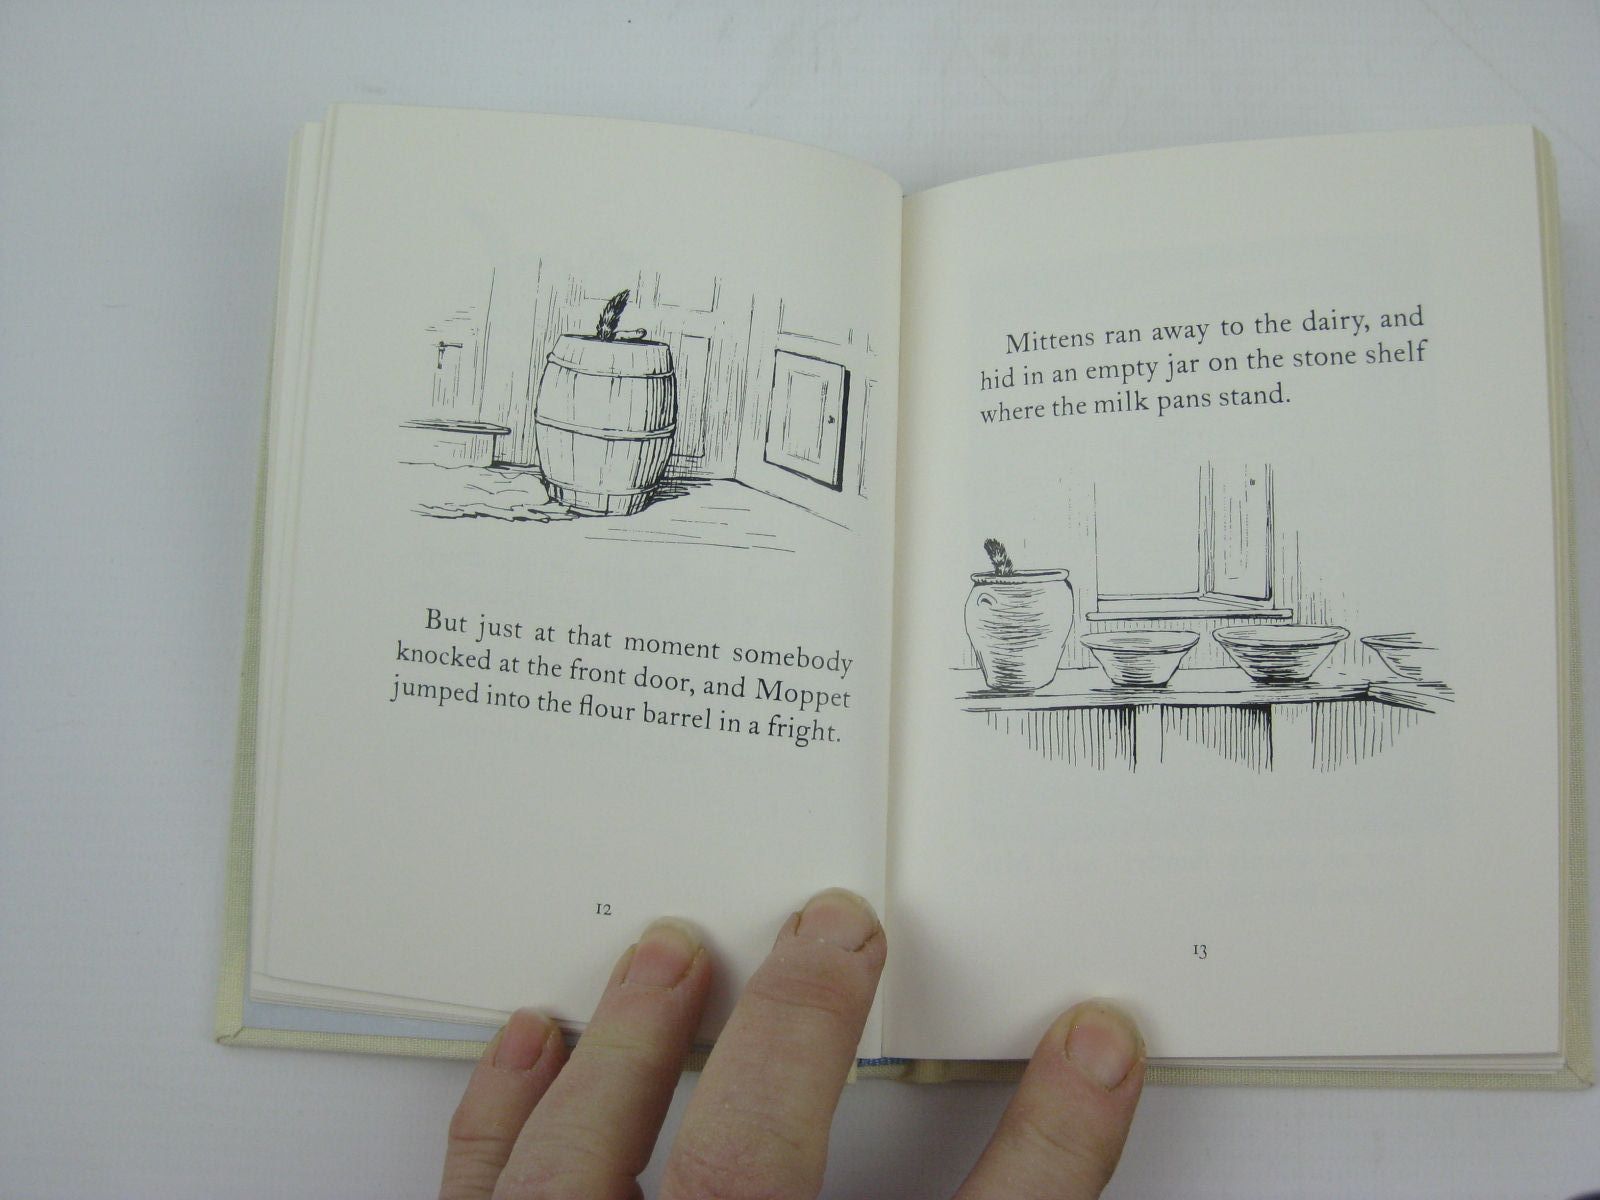 Photo of THE TALE OF SAMUEL WHISKERS OR THE ROLY-POLY PUDDING written by Potter, Beatrix illustrated by Potter, Beatrix published by Frederick Warne, The Penguin Group (STOCK CODE: 1316345)  for sale by Stella & Rose's Books